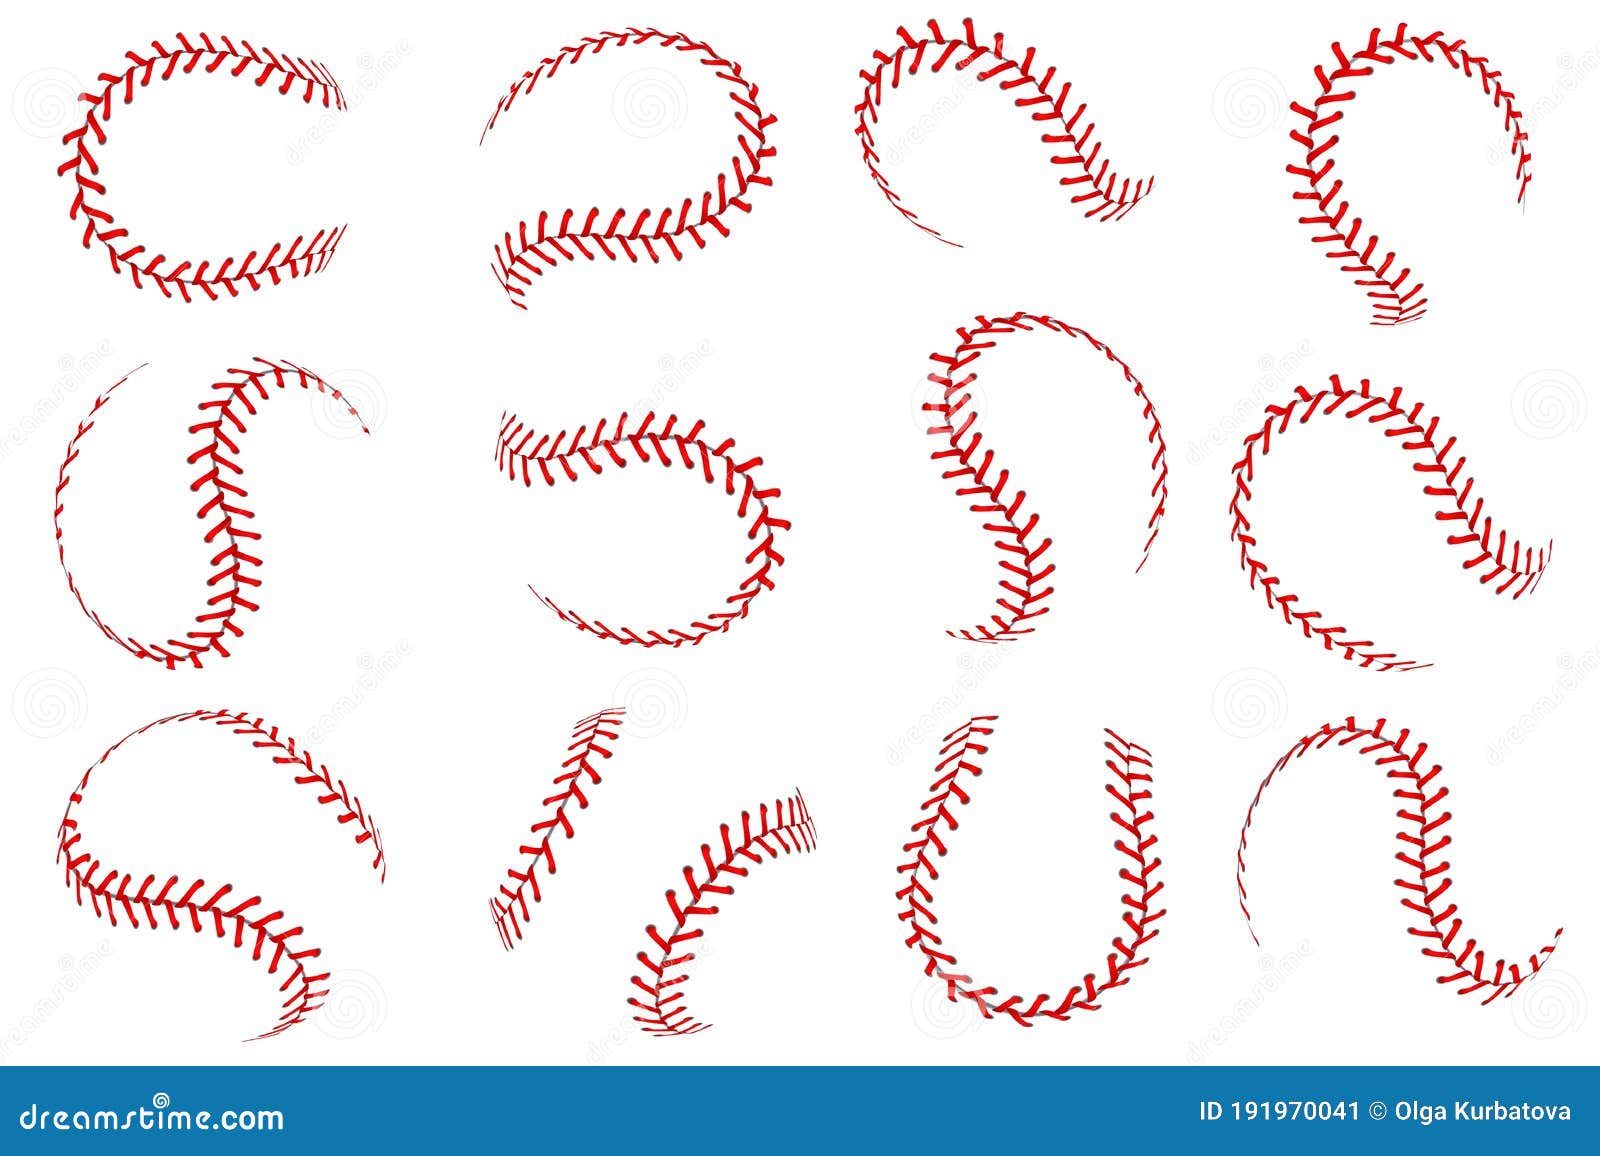 baseball ball lace. softball balls with red threads stitches graphic s, spherical stroke lines leather sport